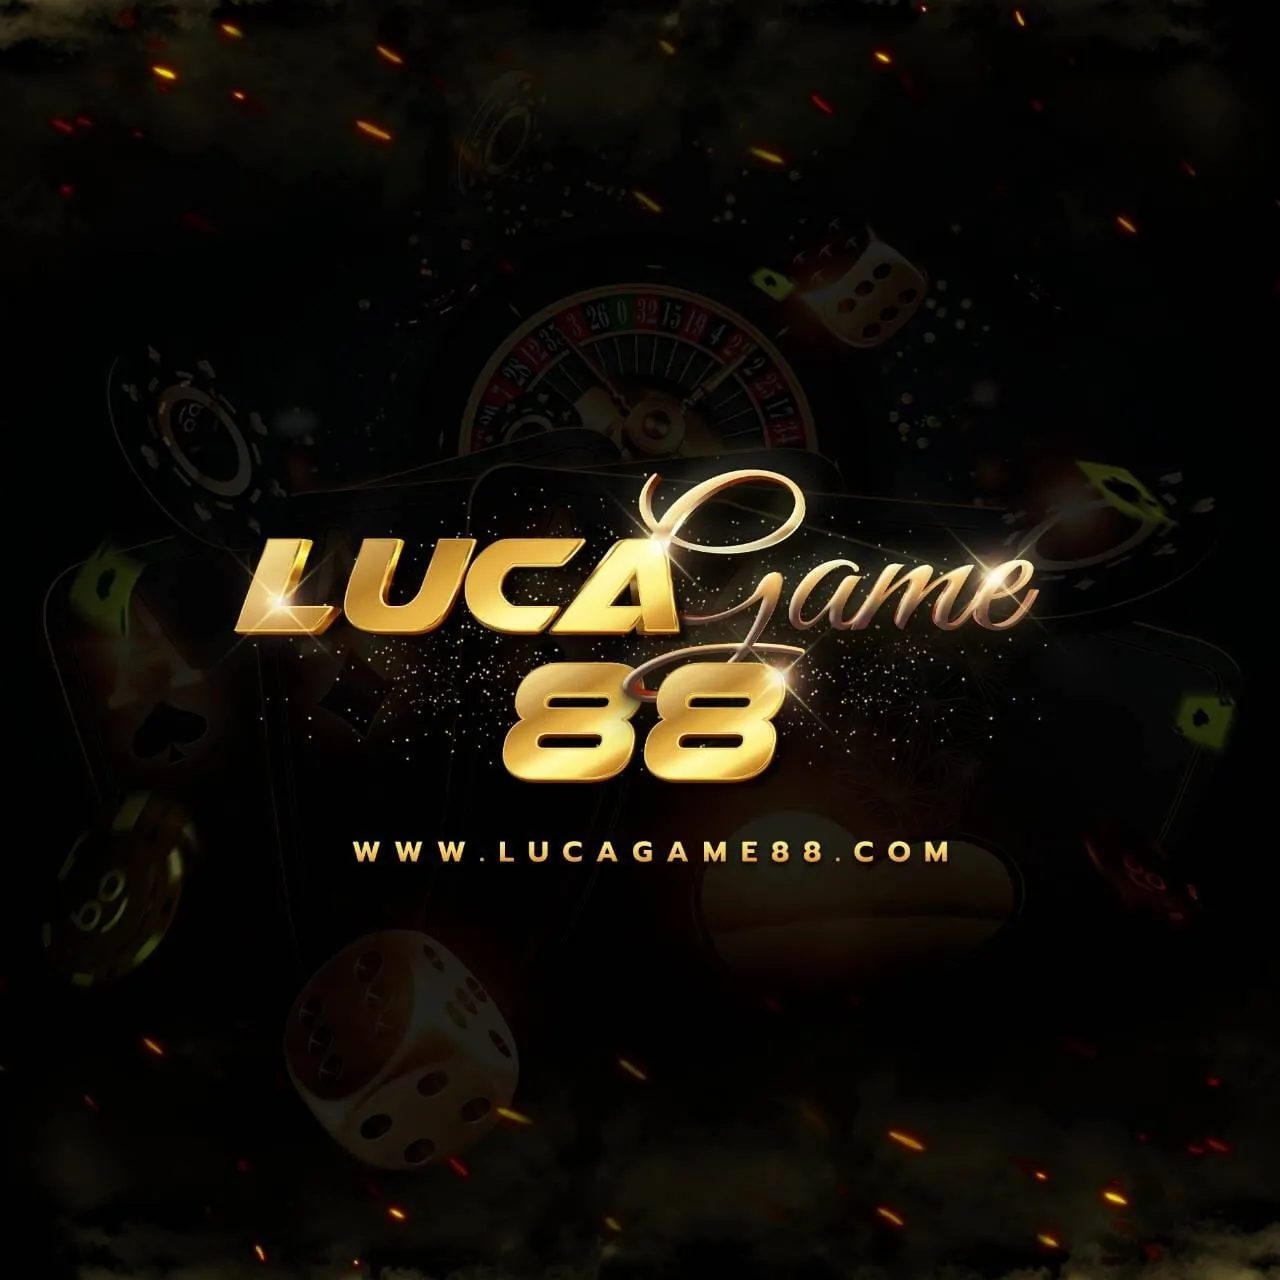 lcgame88